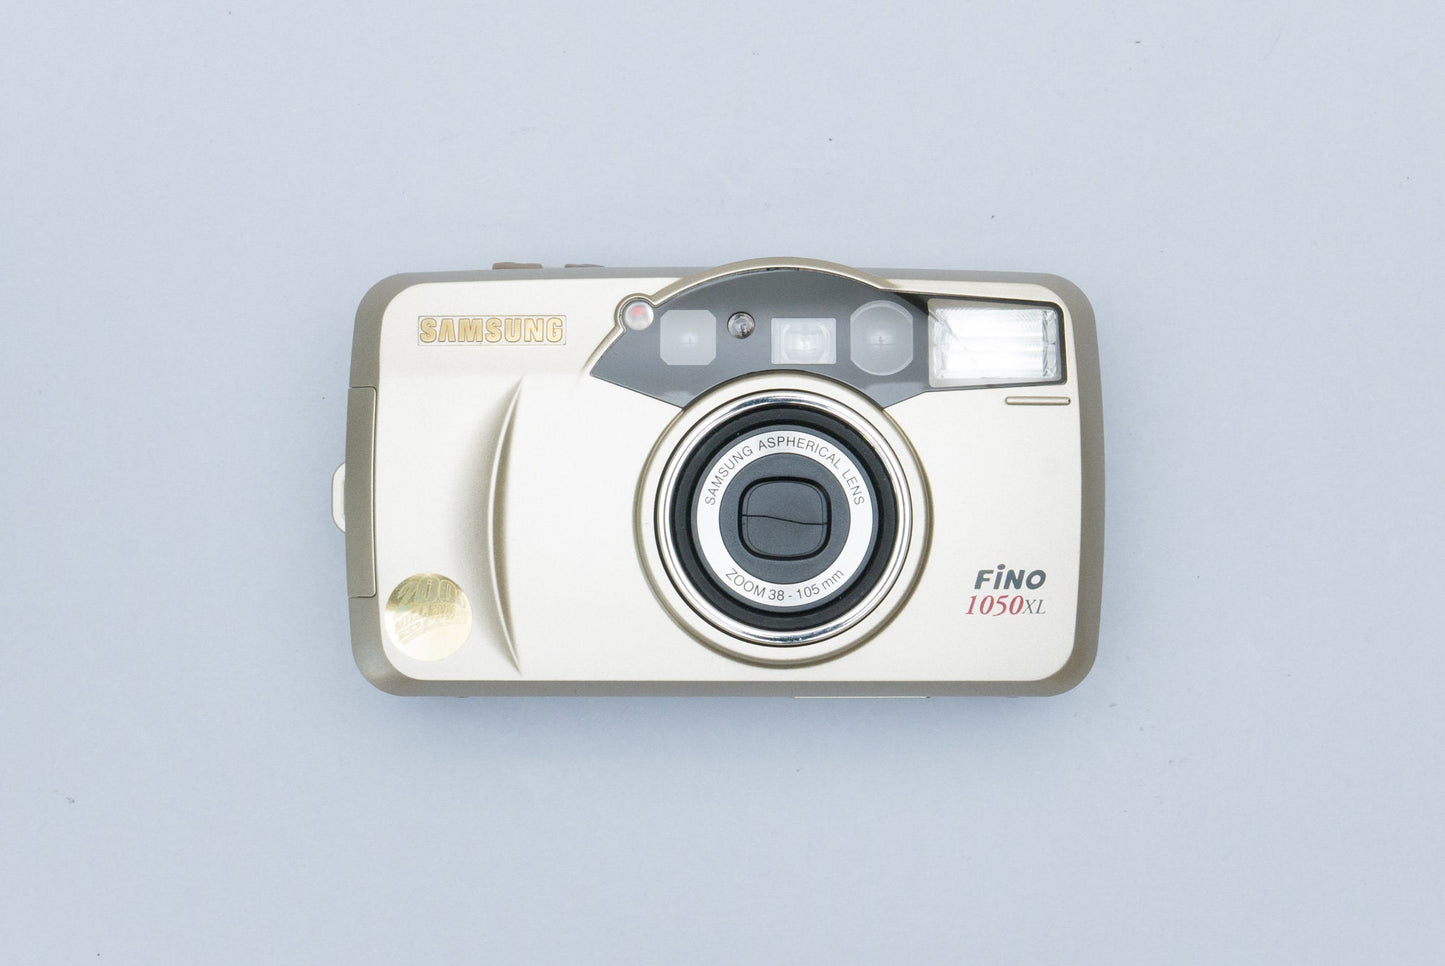 Samsung Fino 1050XL Compact 35mm Point and Shoot Film Camera